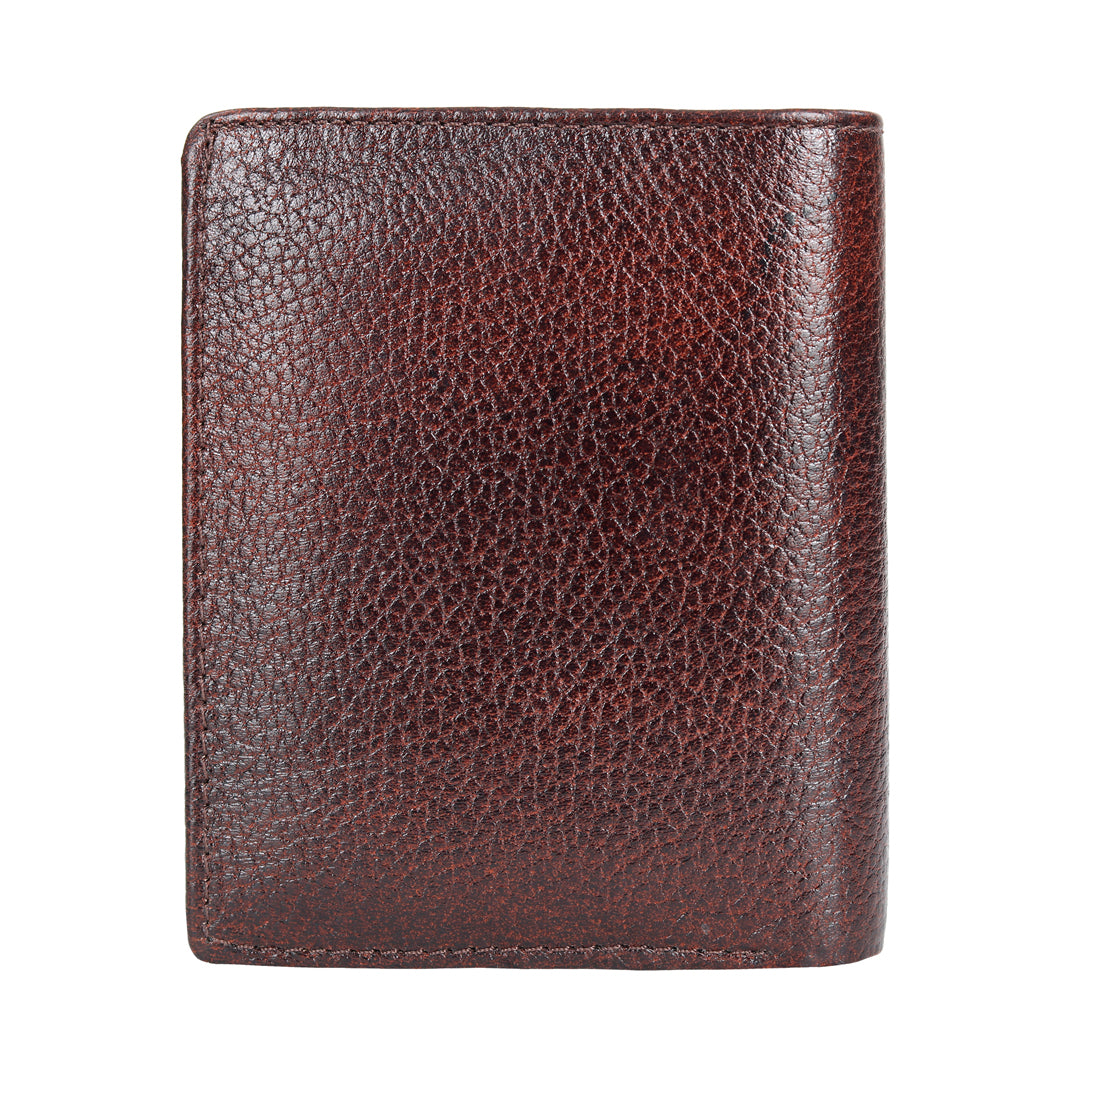 Genuine Gritty Leather Casual Wallet For Men